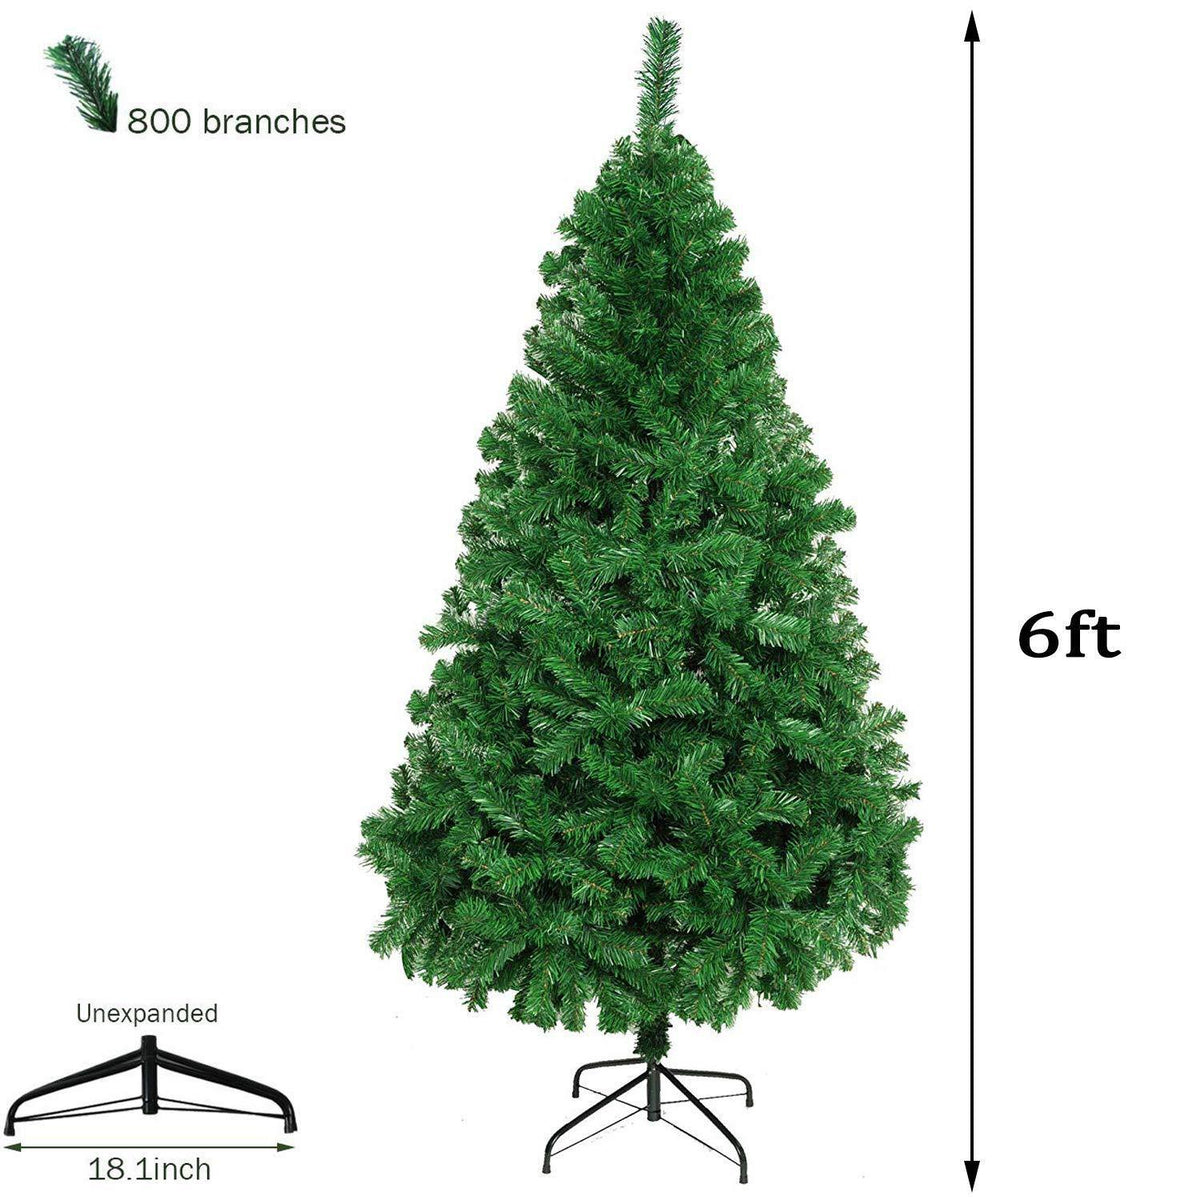 6 Ft Christmas Tree 800 Tips Decorate Pine Tree with Light and Free ...